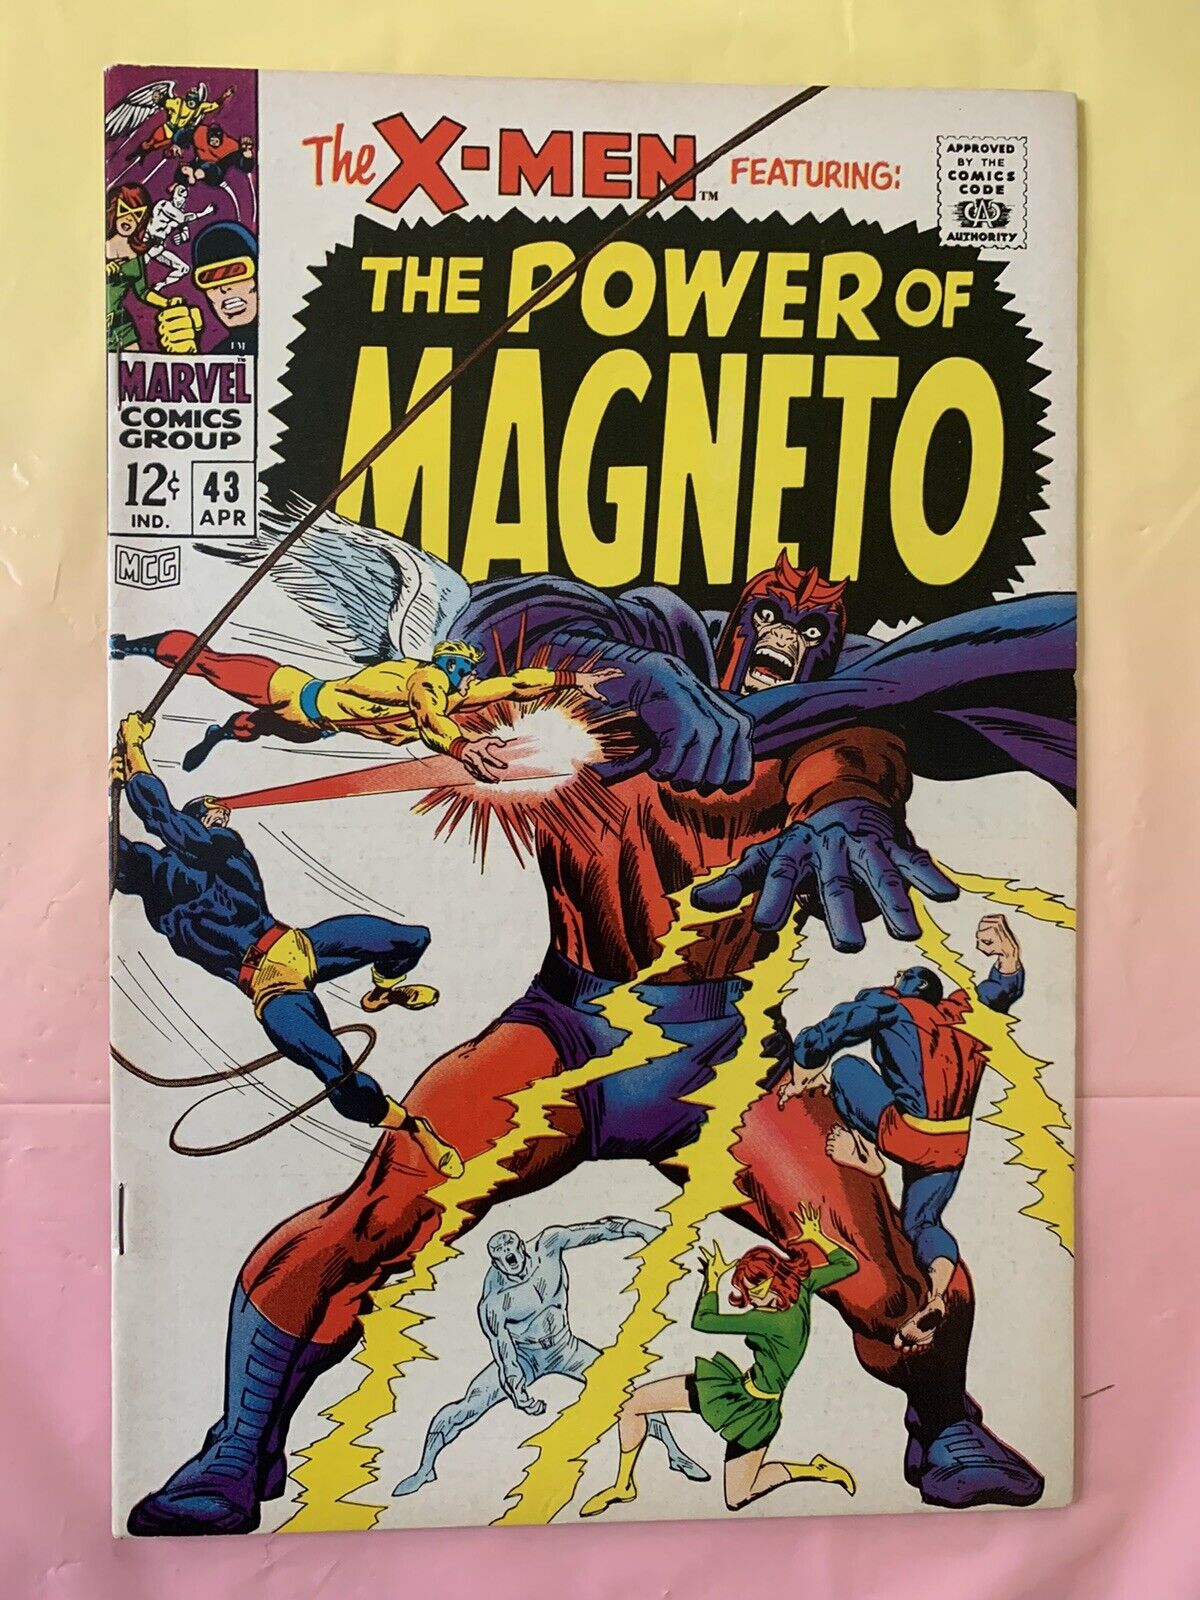 1967 Marvel Comics The X-Men #43 The Power of Magneto Silver Age High Grade NM-